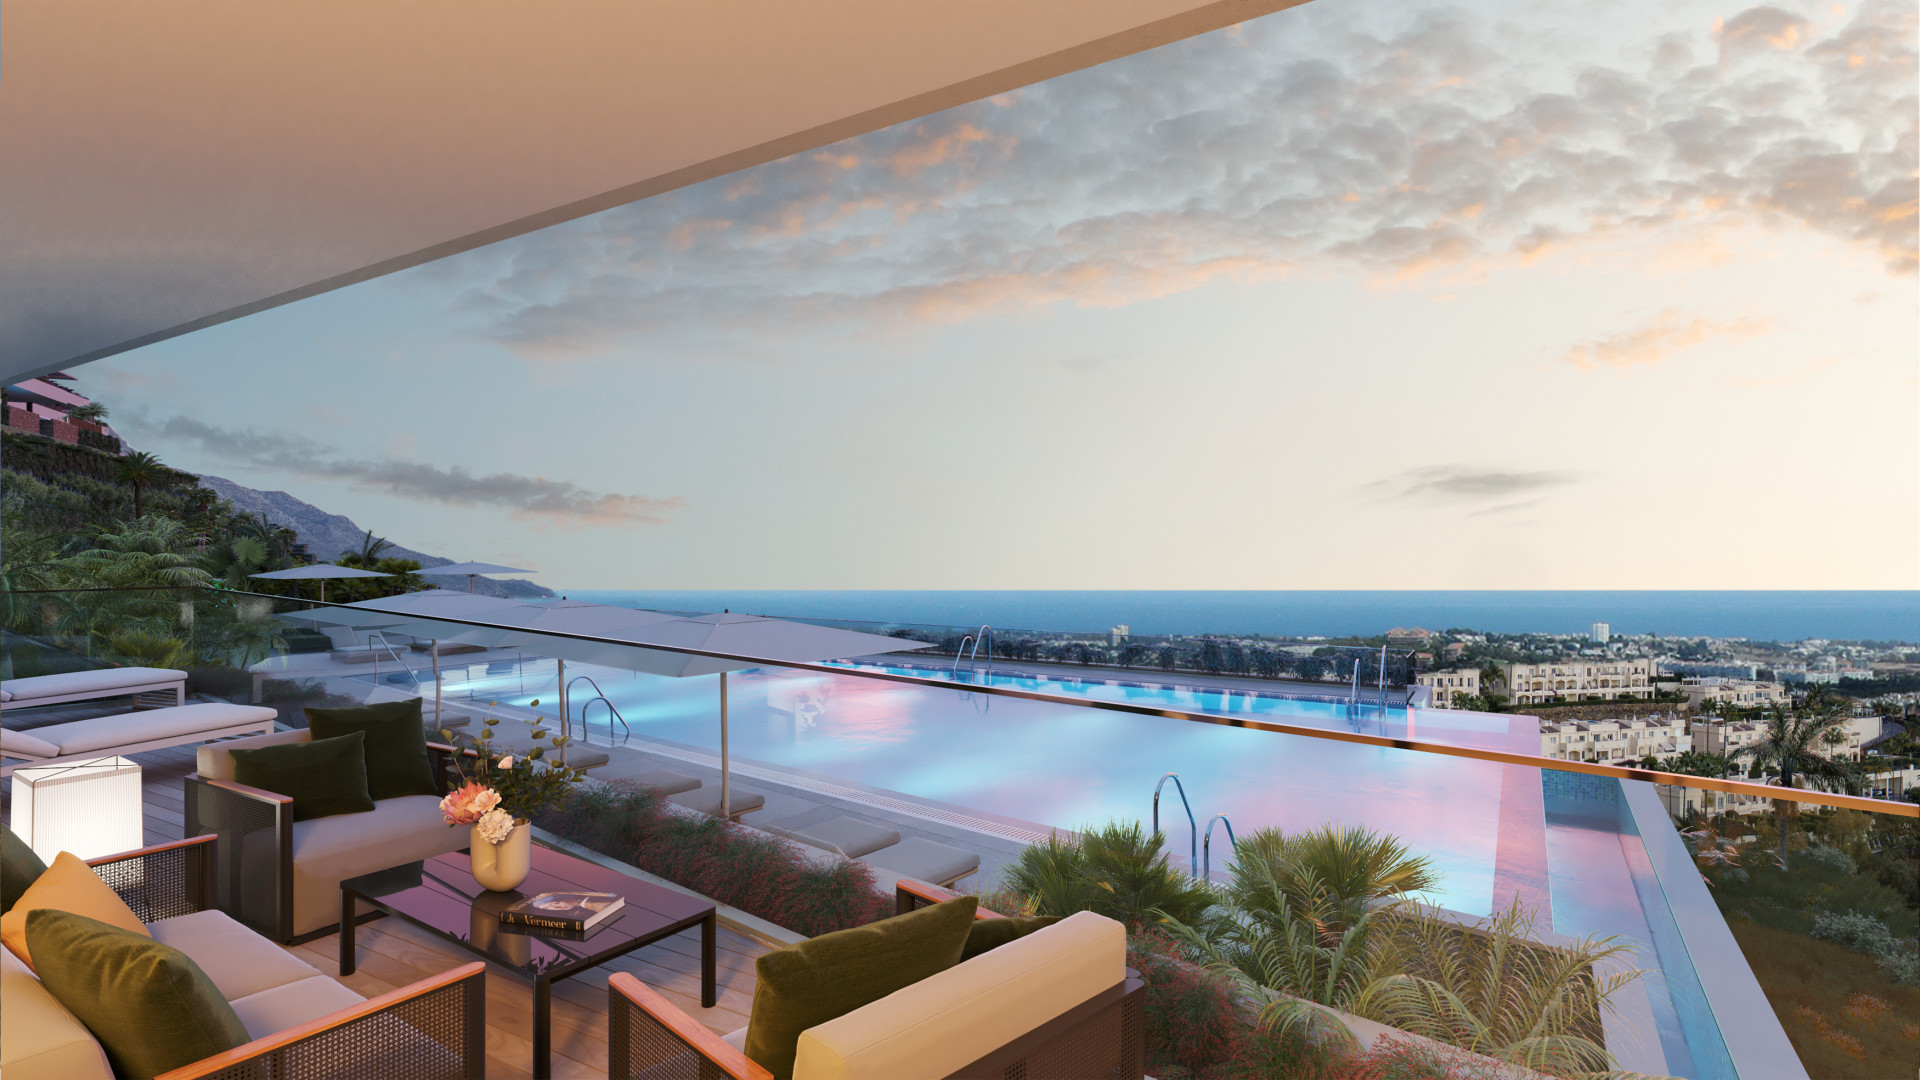 Tiara: Complex of 3 and 4 bedroom apartments with panoramic sea views over the Golf Valley | Image 1